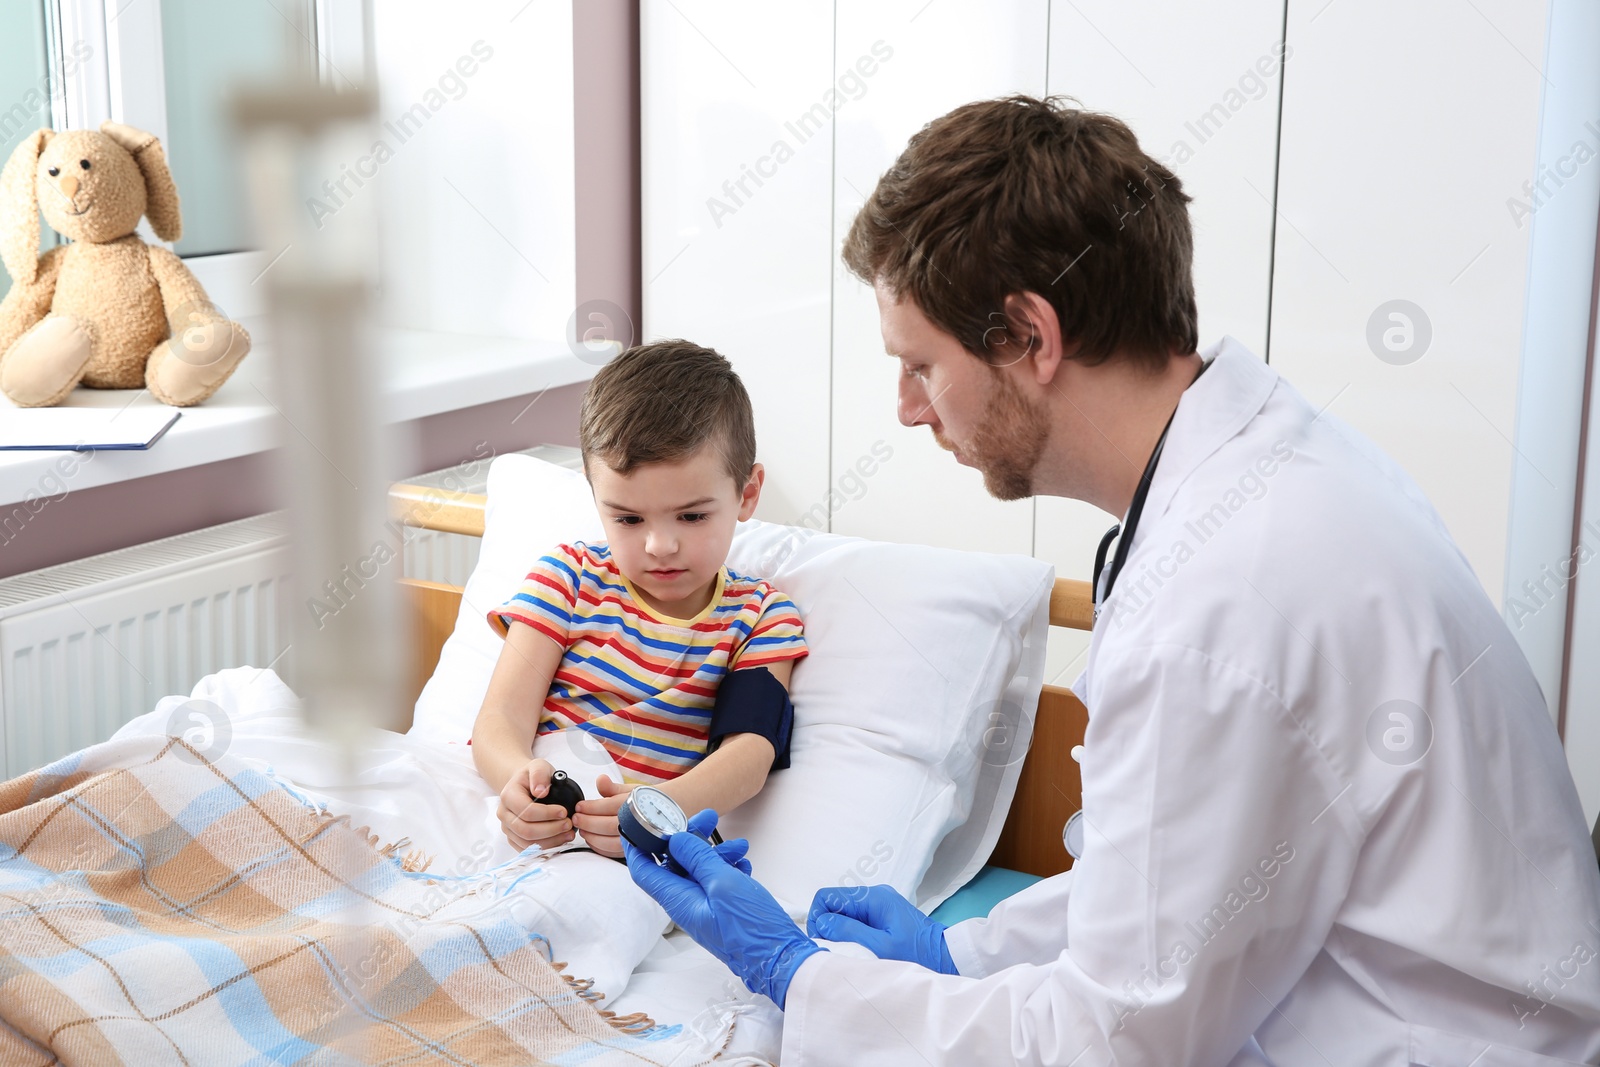 Photo of Doctor checking child's blood pressure in hospital